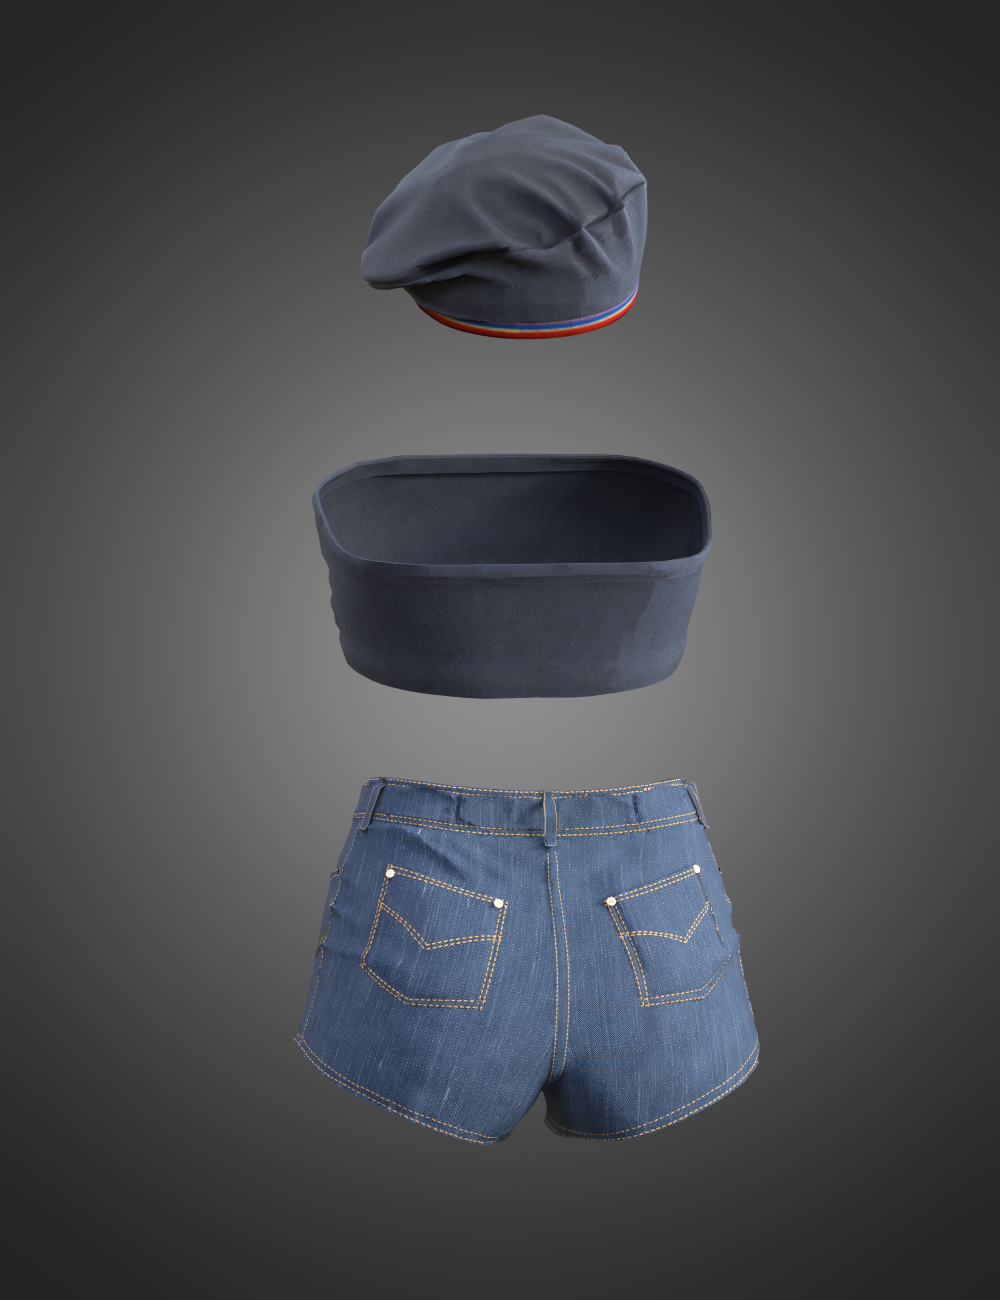 Pride Outfit Shorts, Shirt, and Beret for Genesis 8 and 8.1 Females by: Charlie, 3D Models by Daz 3D